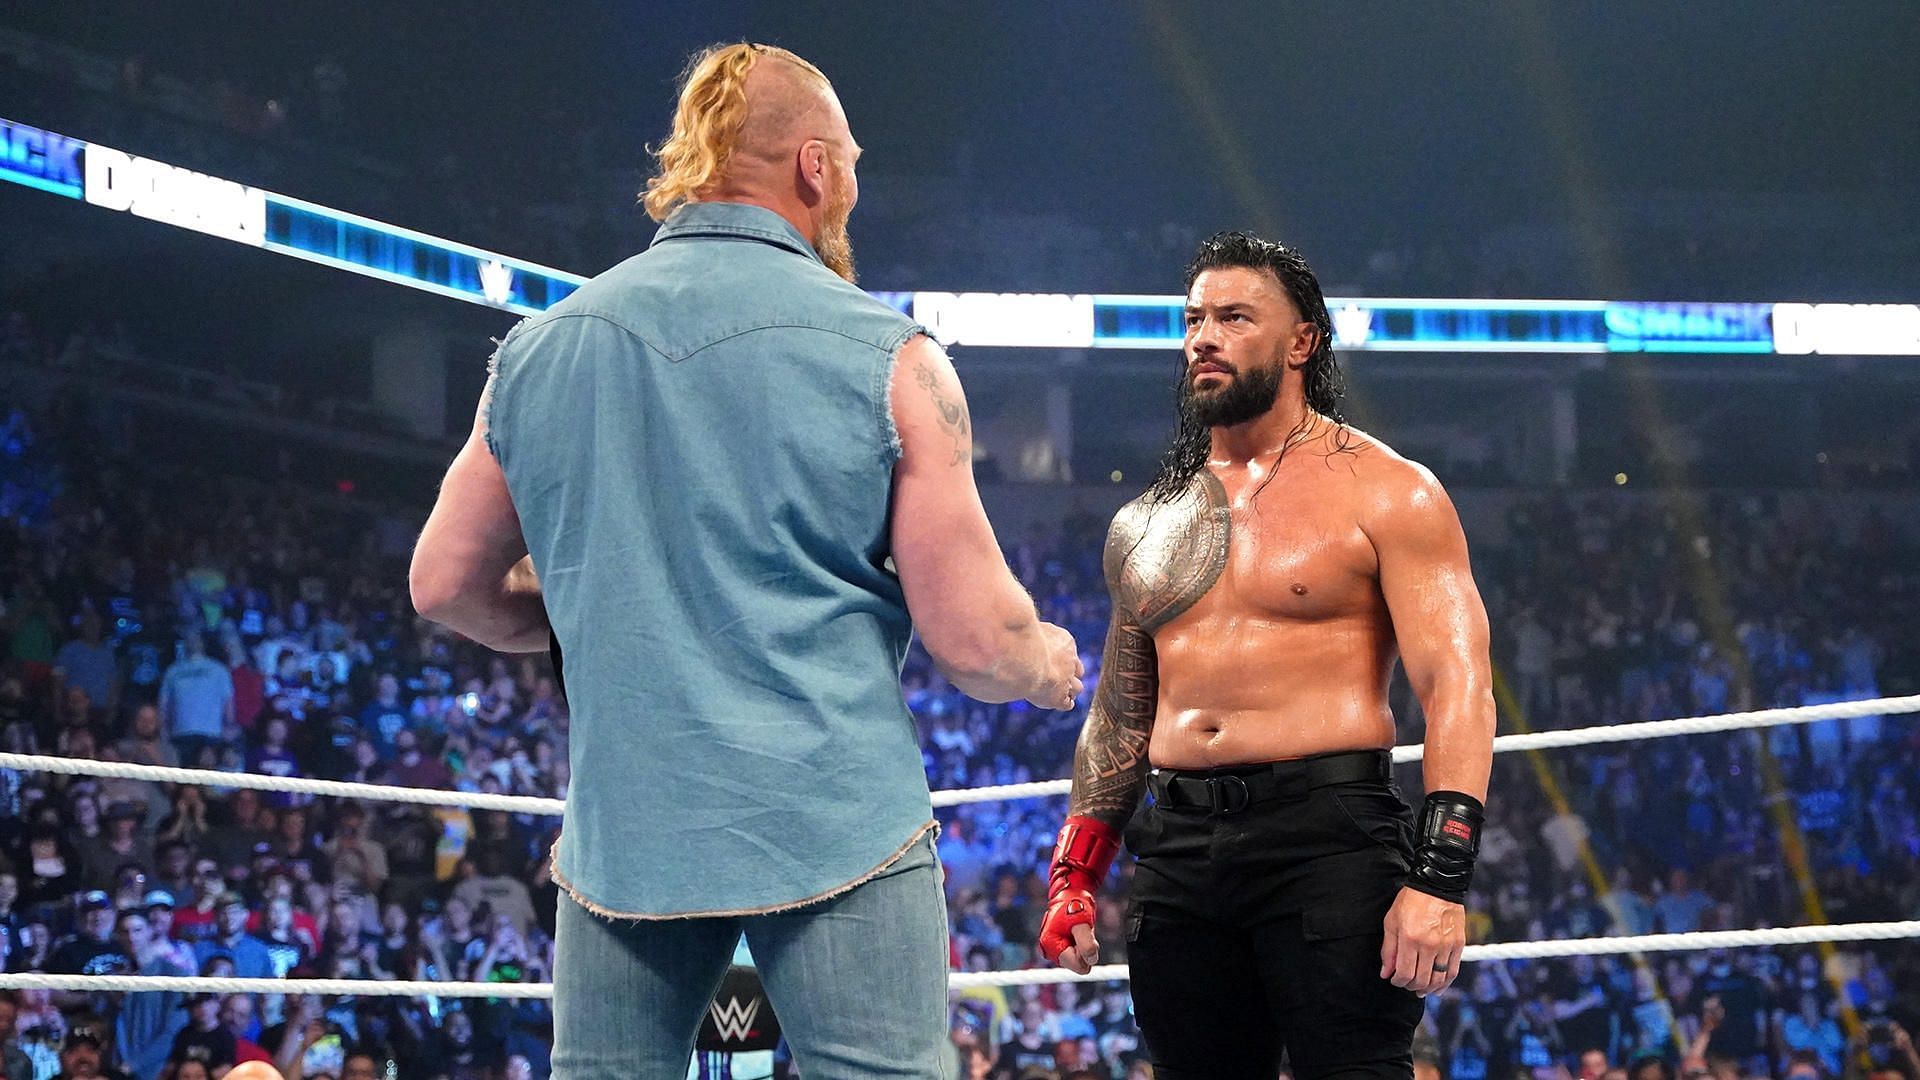 A familiar foe visited Roman Reigns on WWE SmackDown